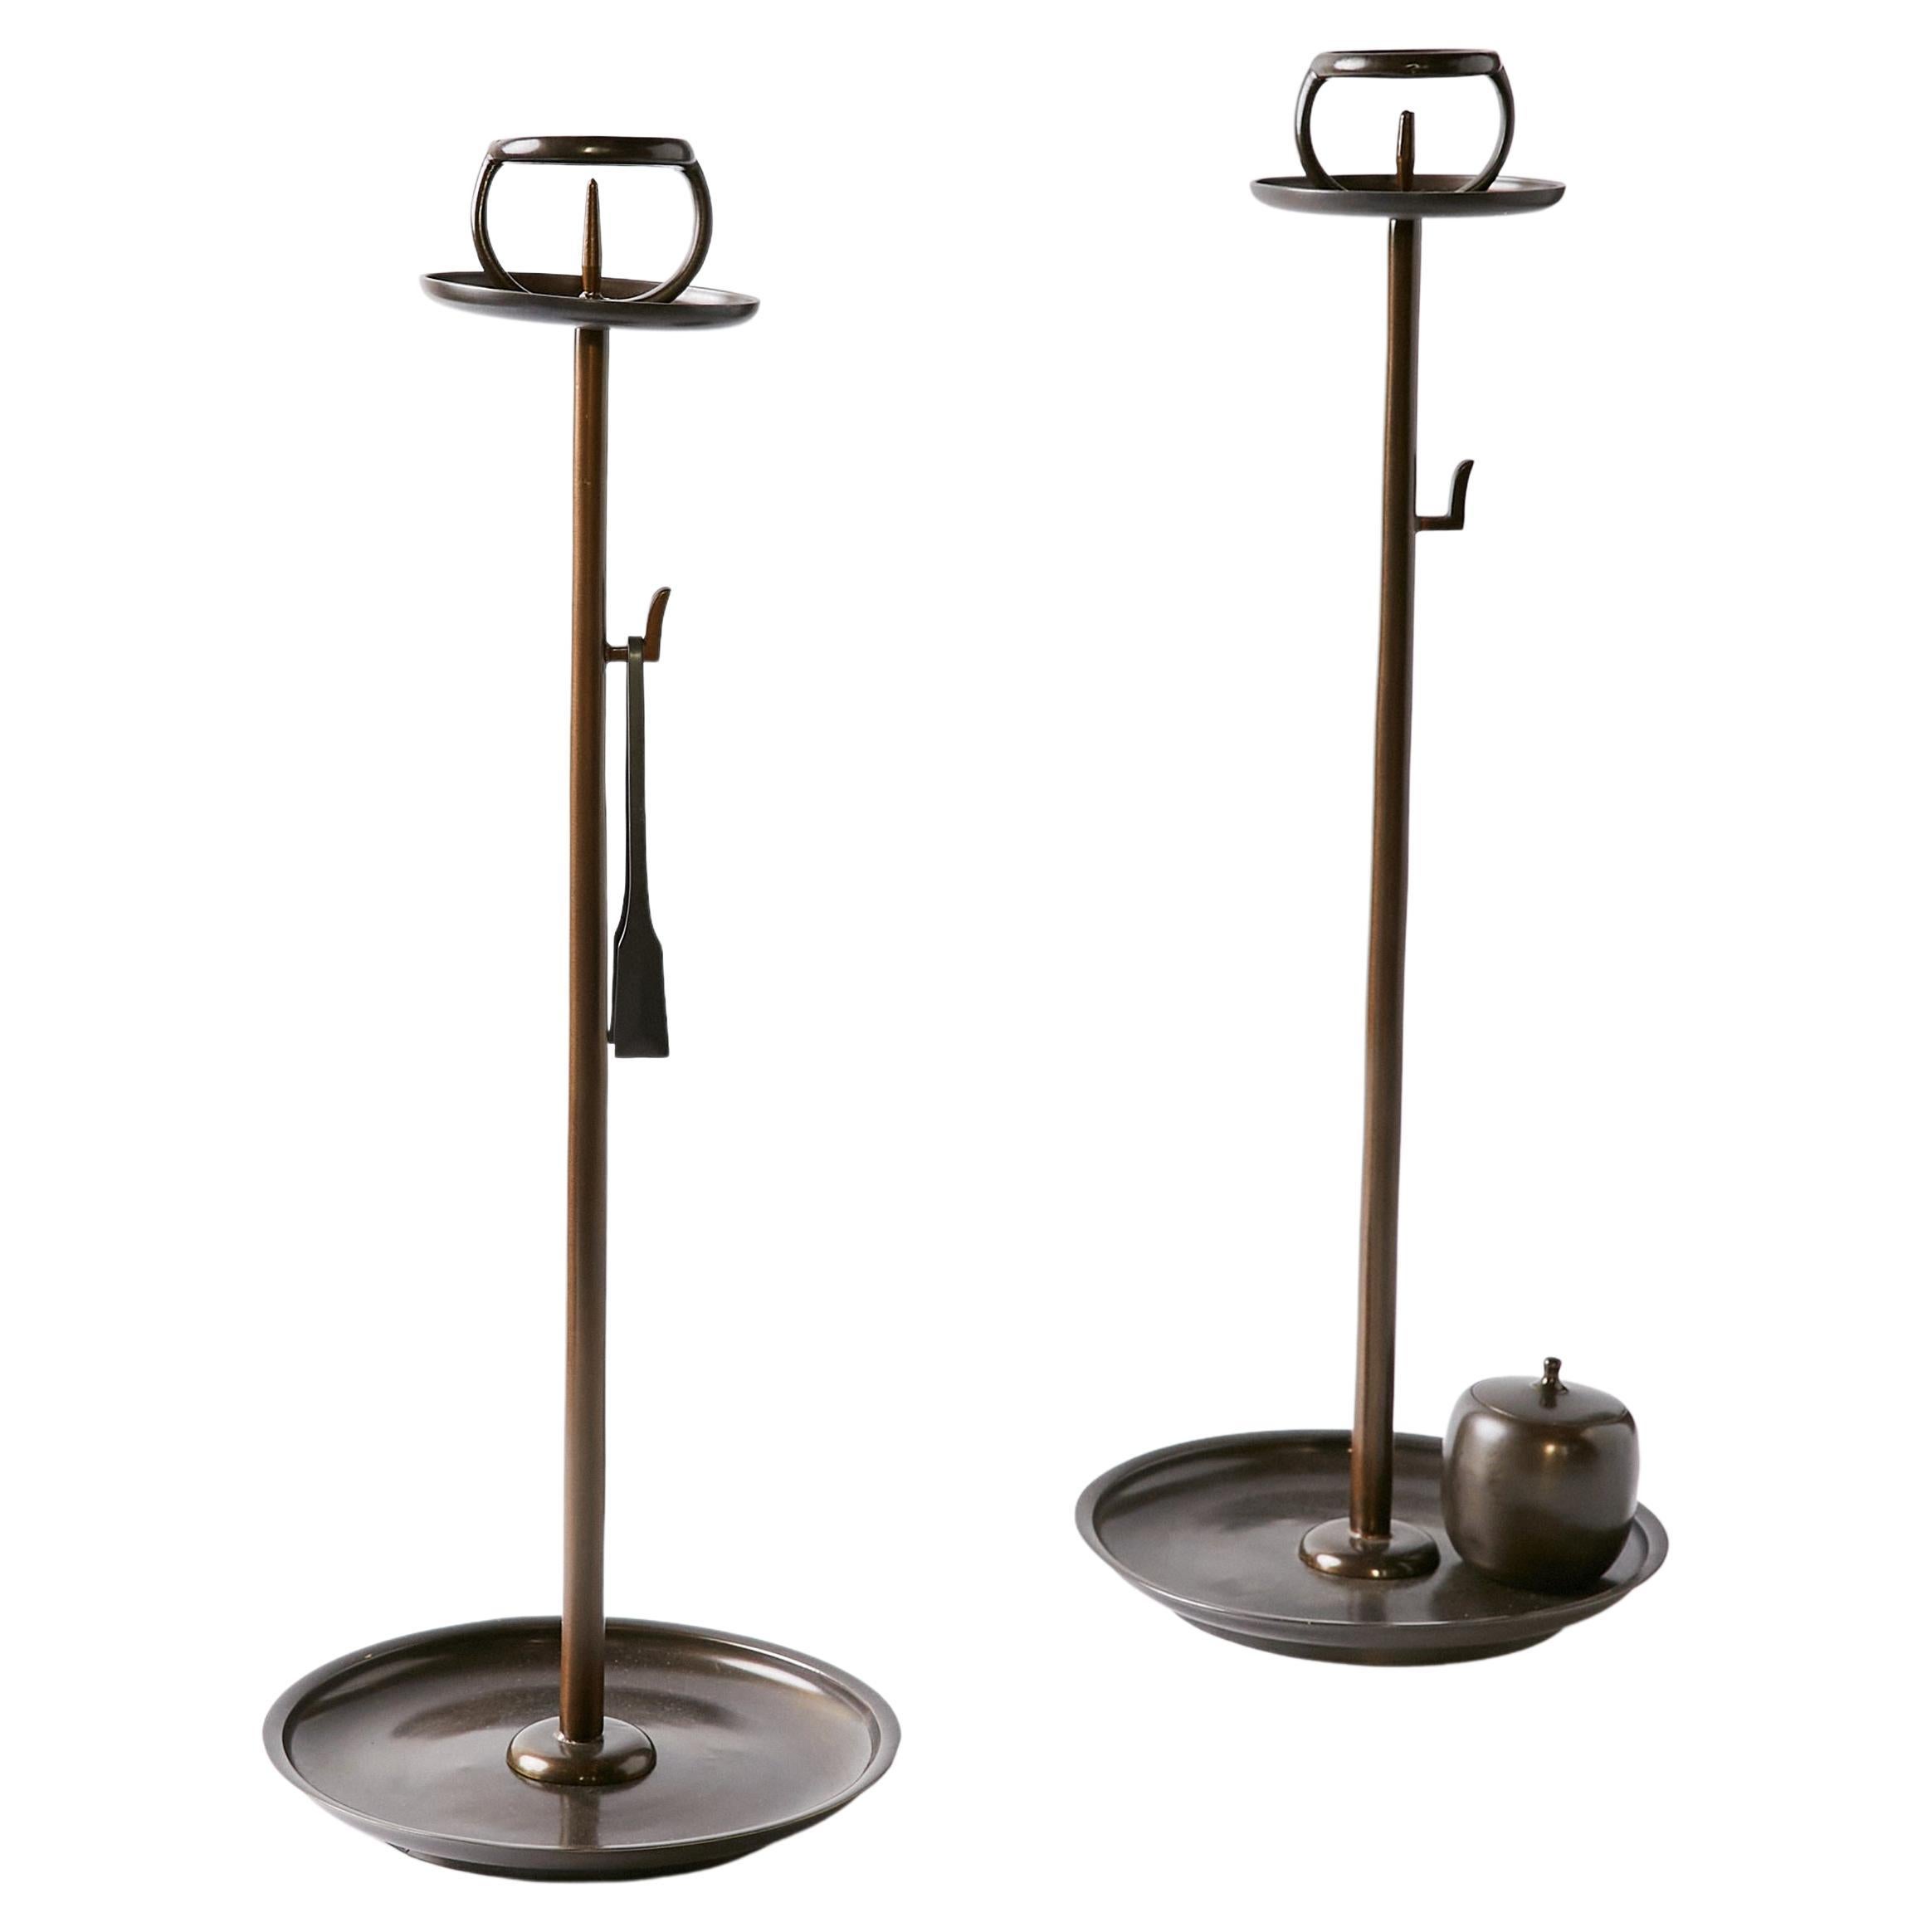 Pair of Antique Shokudai Candle Stand from Japan